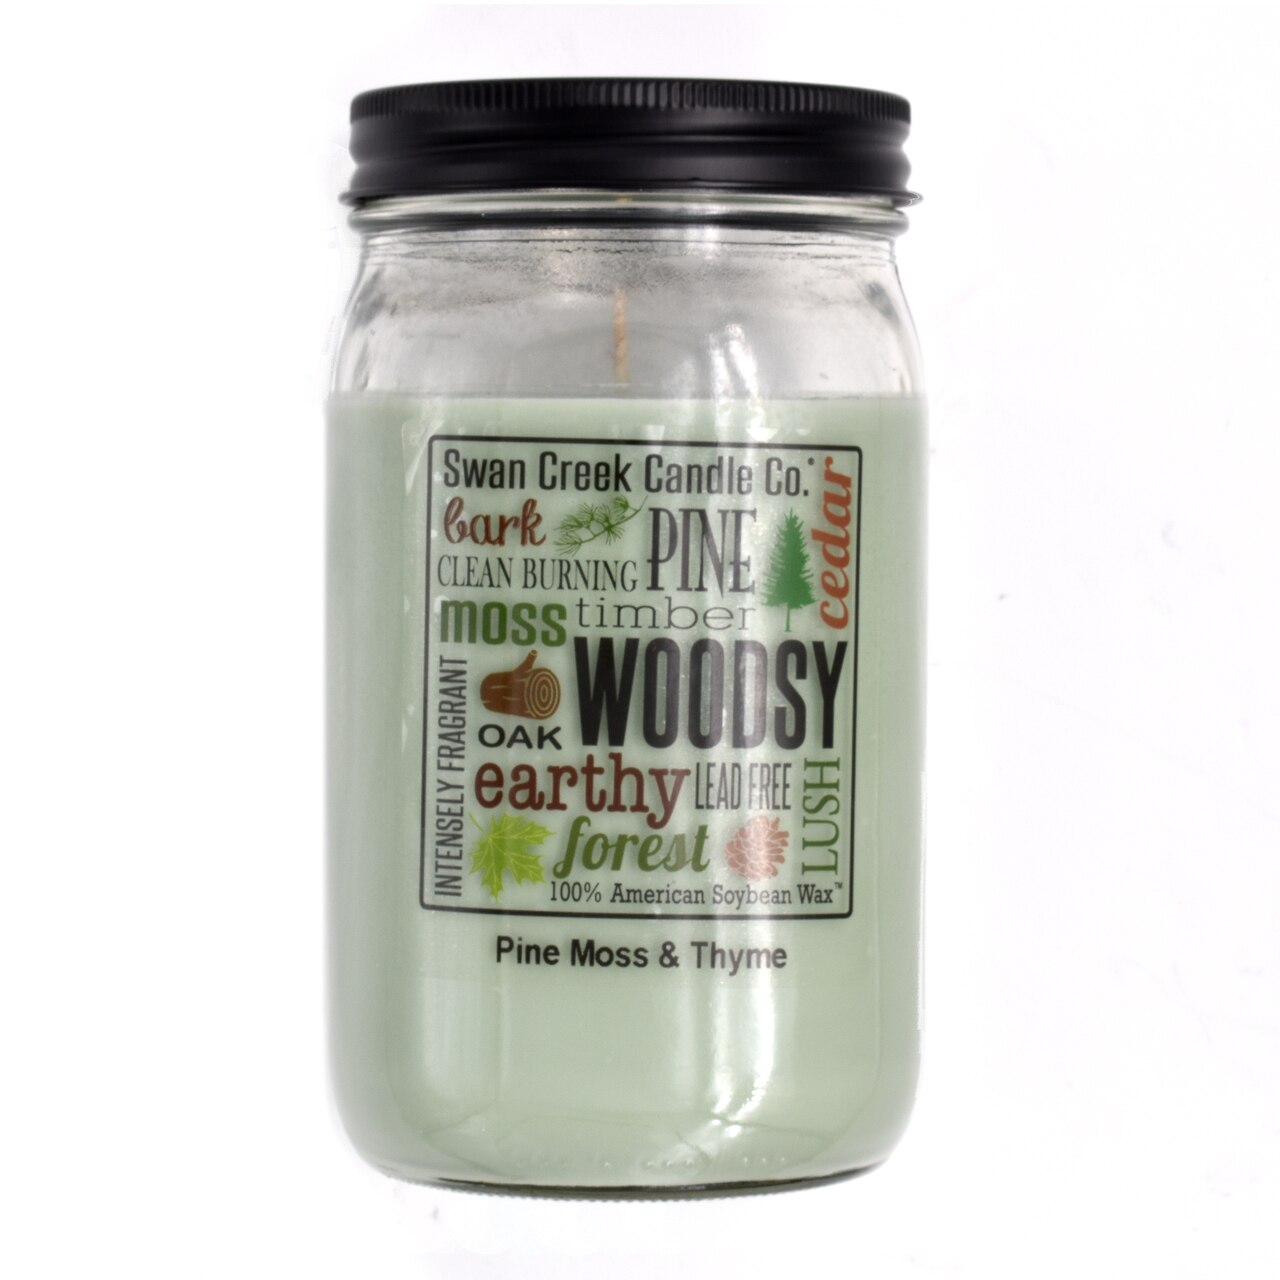 Pine Moss & Thyme Pantry Swan Creek Candle